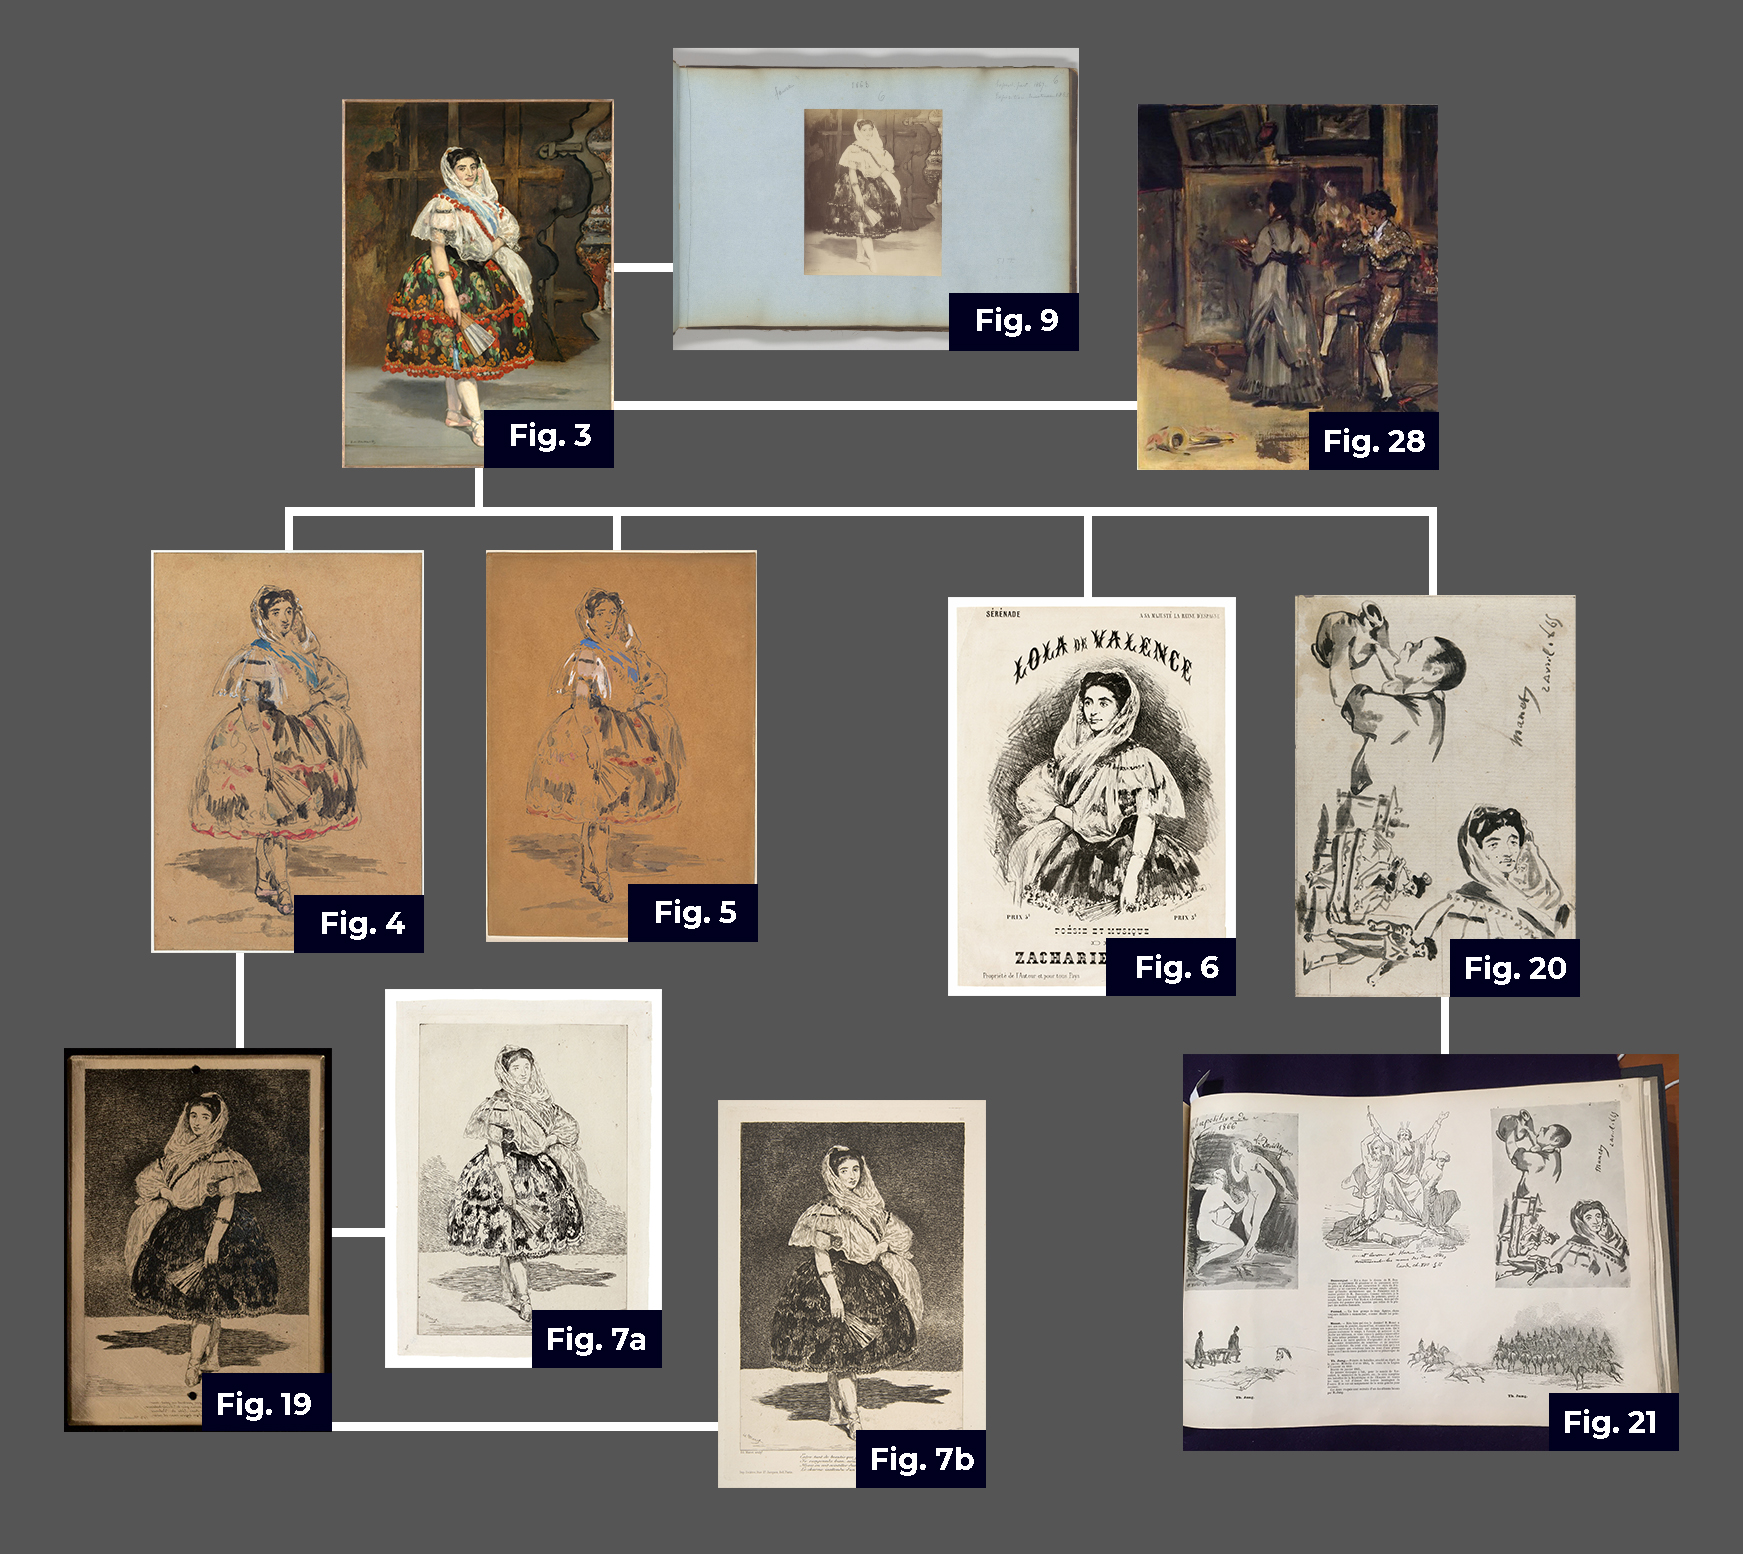 “A genealogical view of works related to *Lola de Valence*, illustrating the ways in which Manet worked across media. id 4.2"